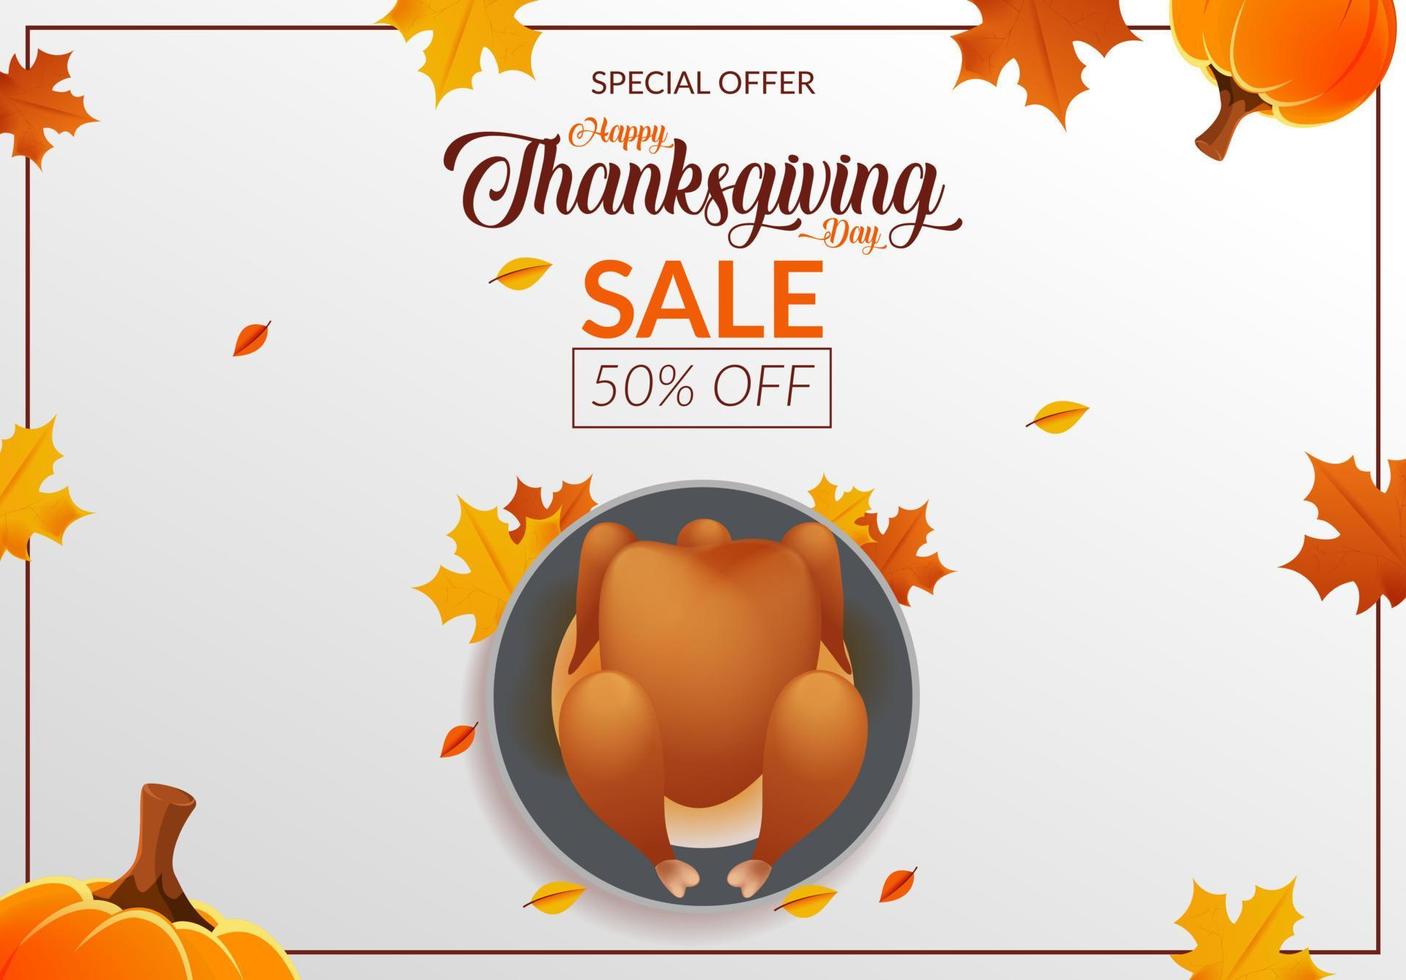 Happy thanksgiving day sale banner vector